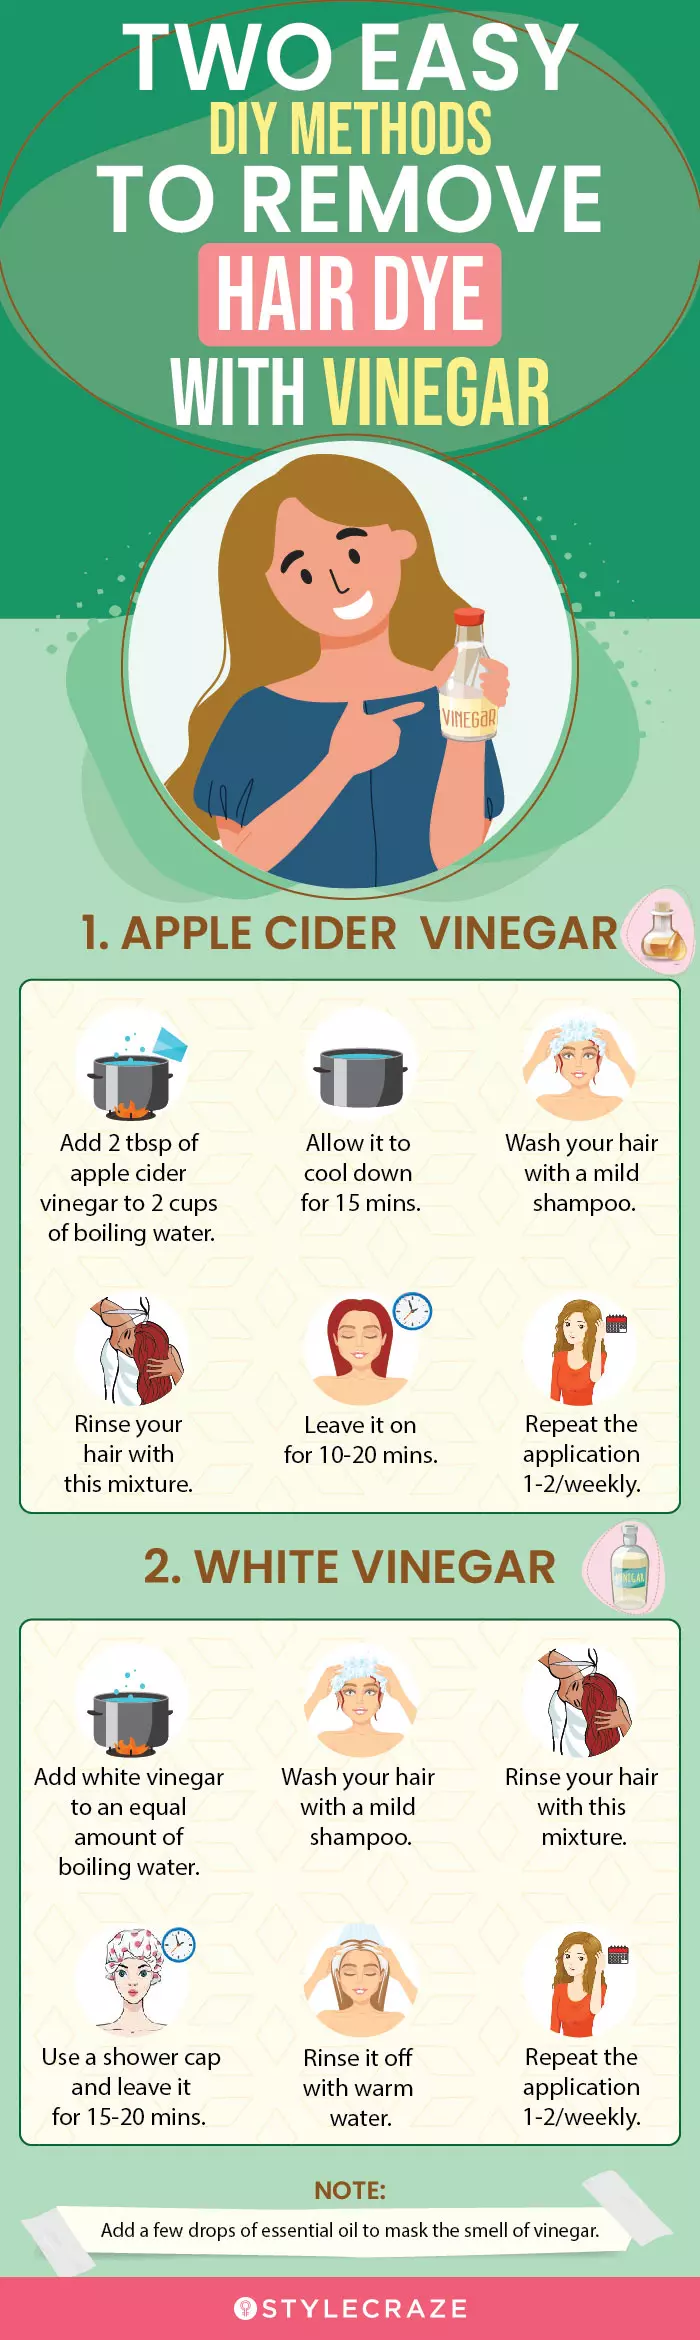 two easy diy methods to remove hair dye with vinegar (infographic)